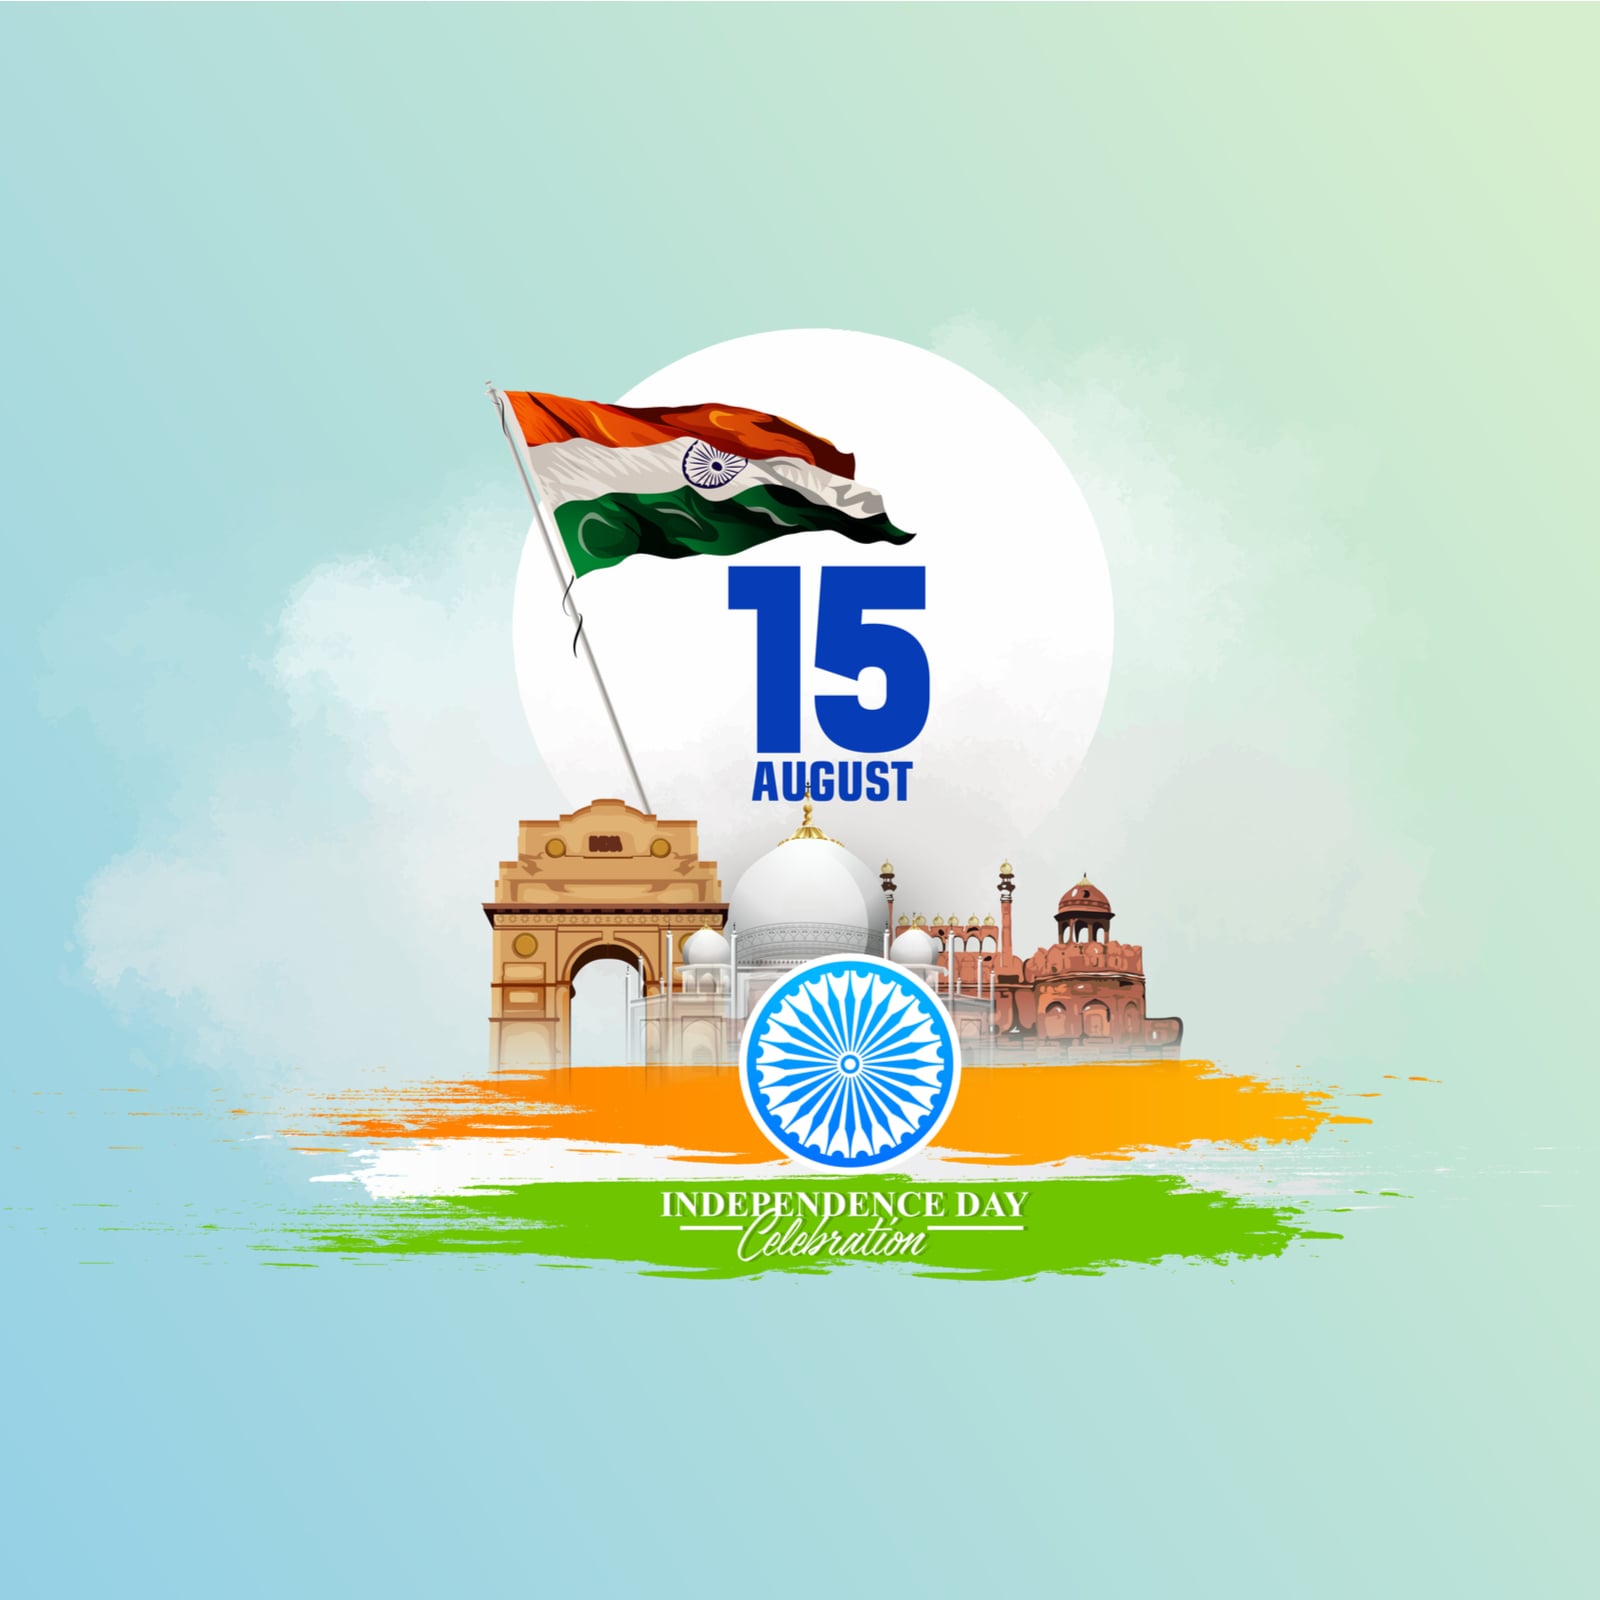 74th Independence Day | Remembering India's great freedom fighters who  sacrificed their lives for the country